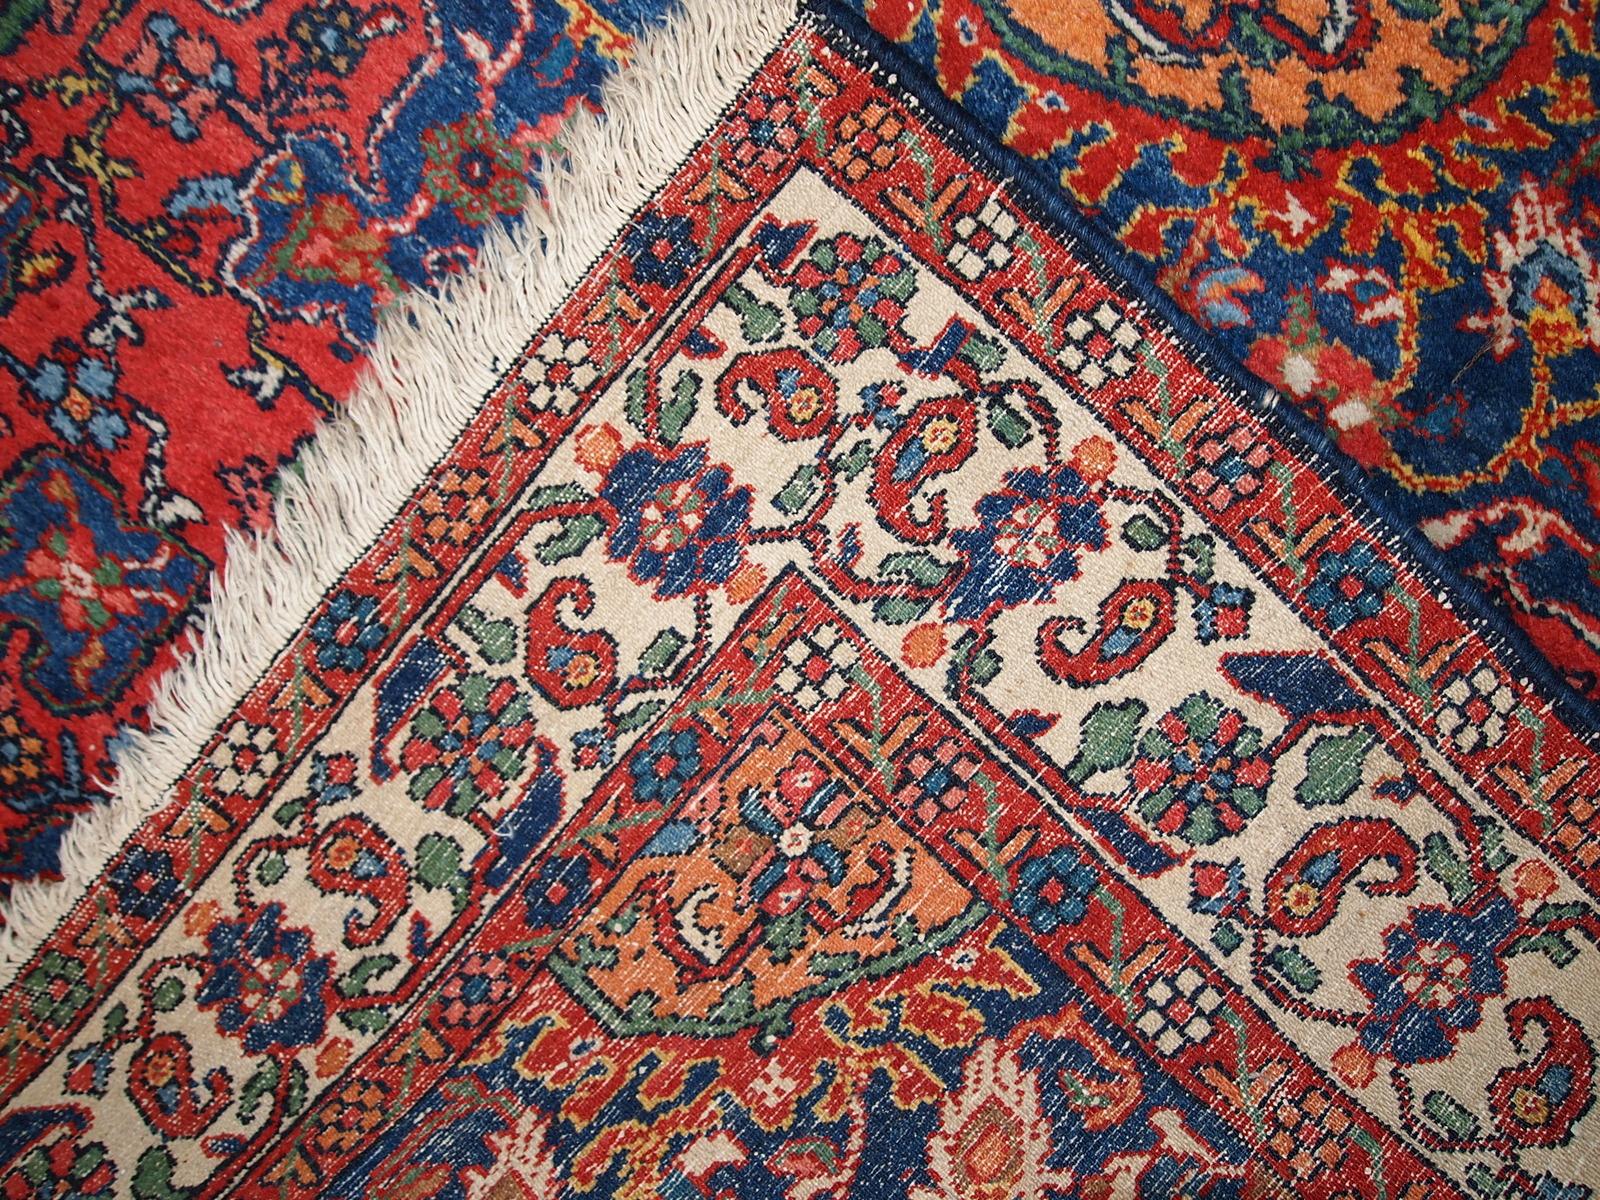 Vintage Mashad style rug in original good condition. It has been hand-weaved in the end of 20th century in wool.

-Condition: Original good,

-circa: 1970s,

-size: 4.6' x 6.4' (141cm x 197cm),

-material: wool,

-country of origin: Middle